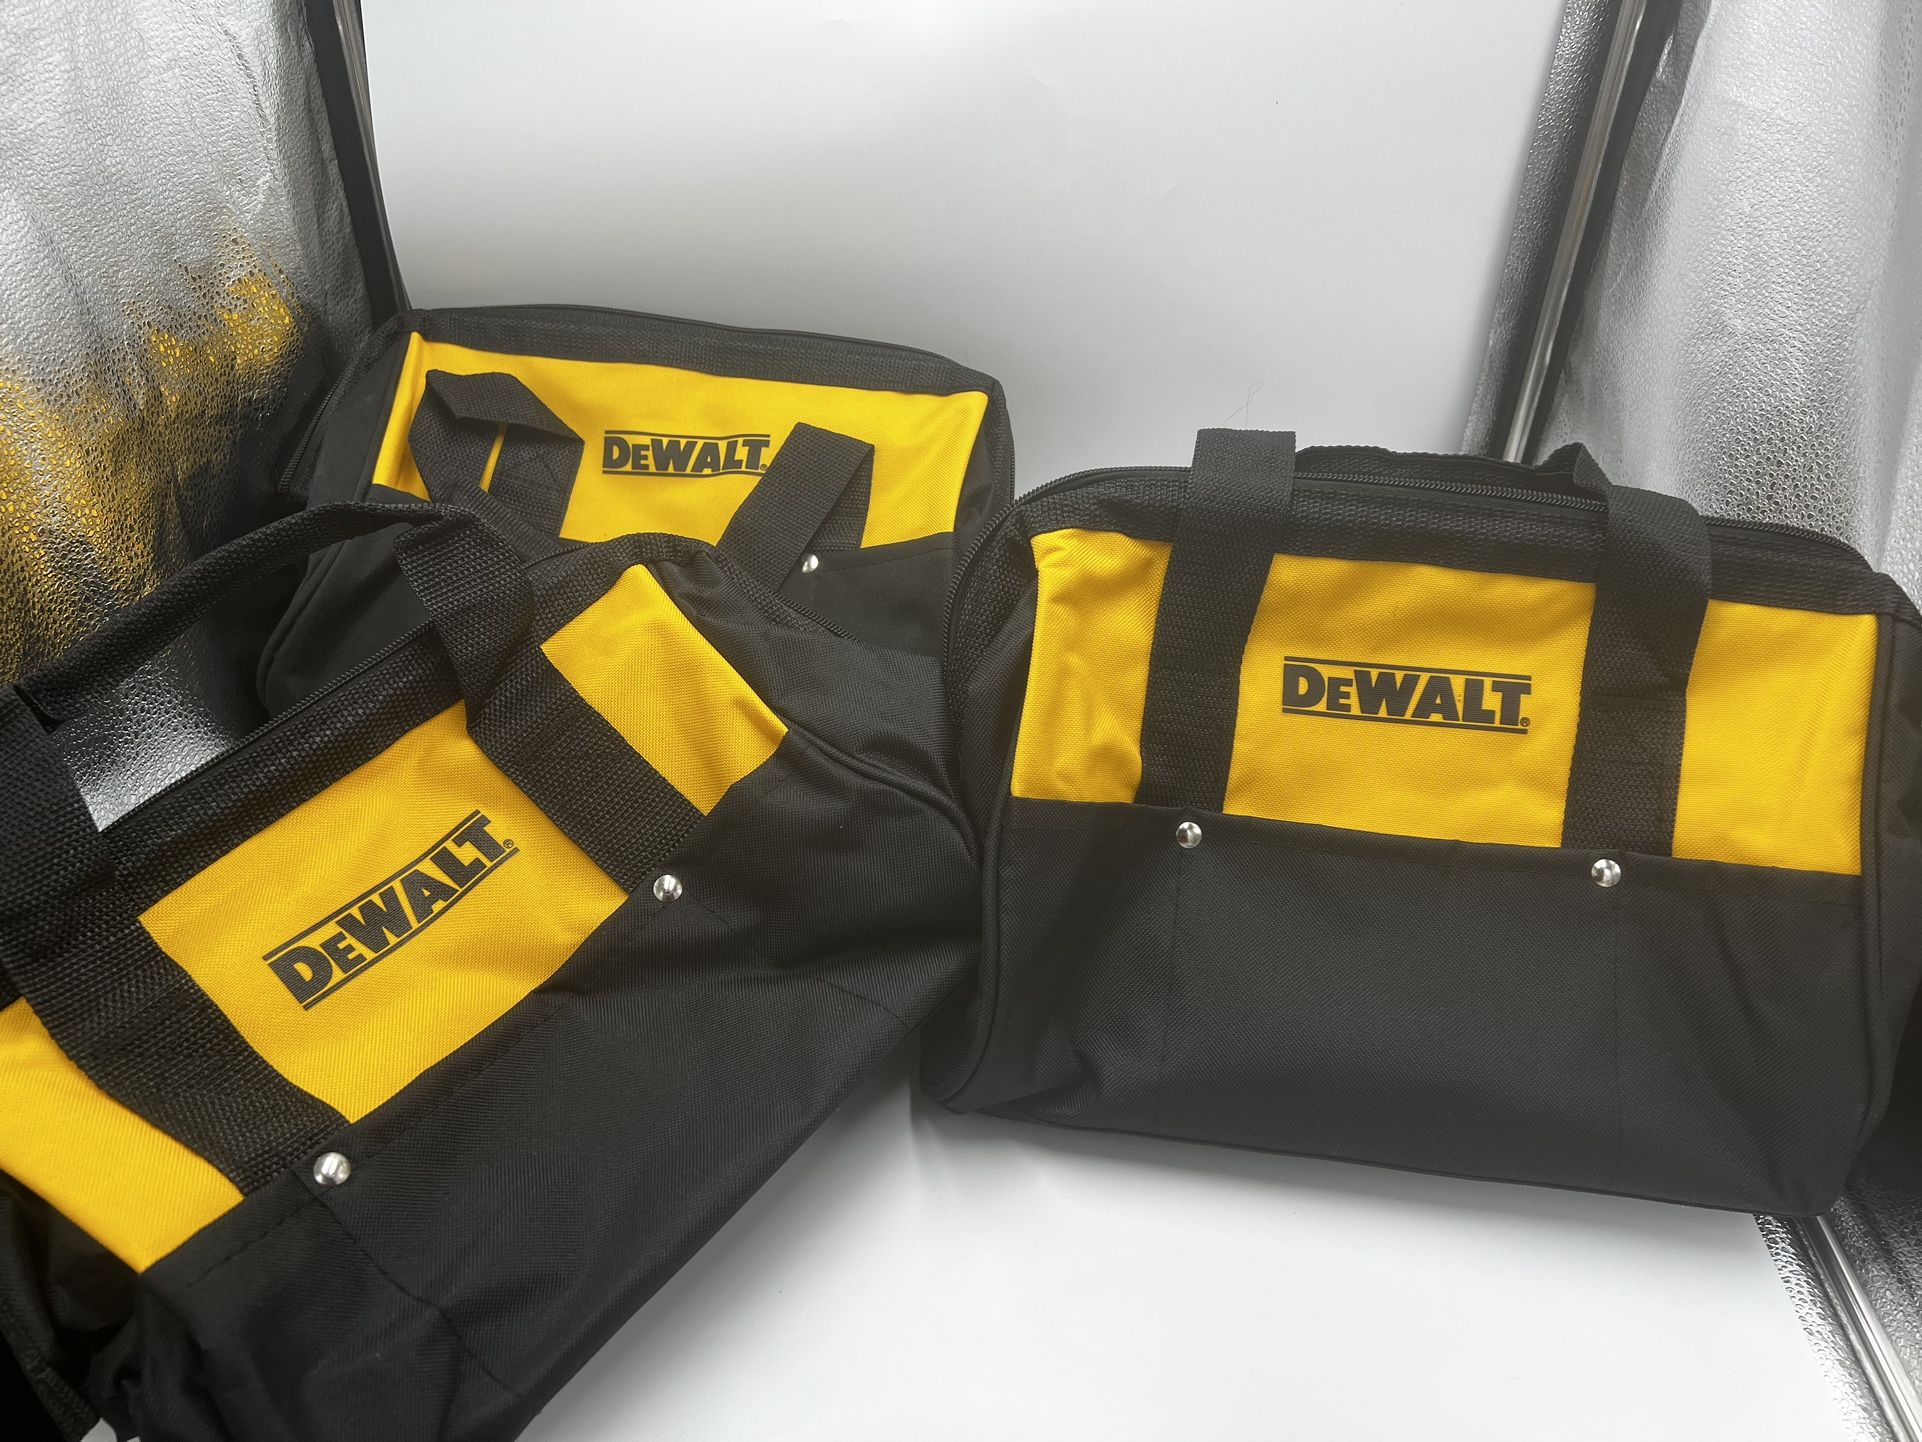 3X Dewalt Small 13” X 9” Contractor Heavy Duty Bag for Power and Hand Tools